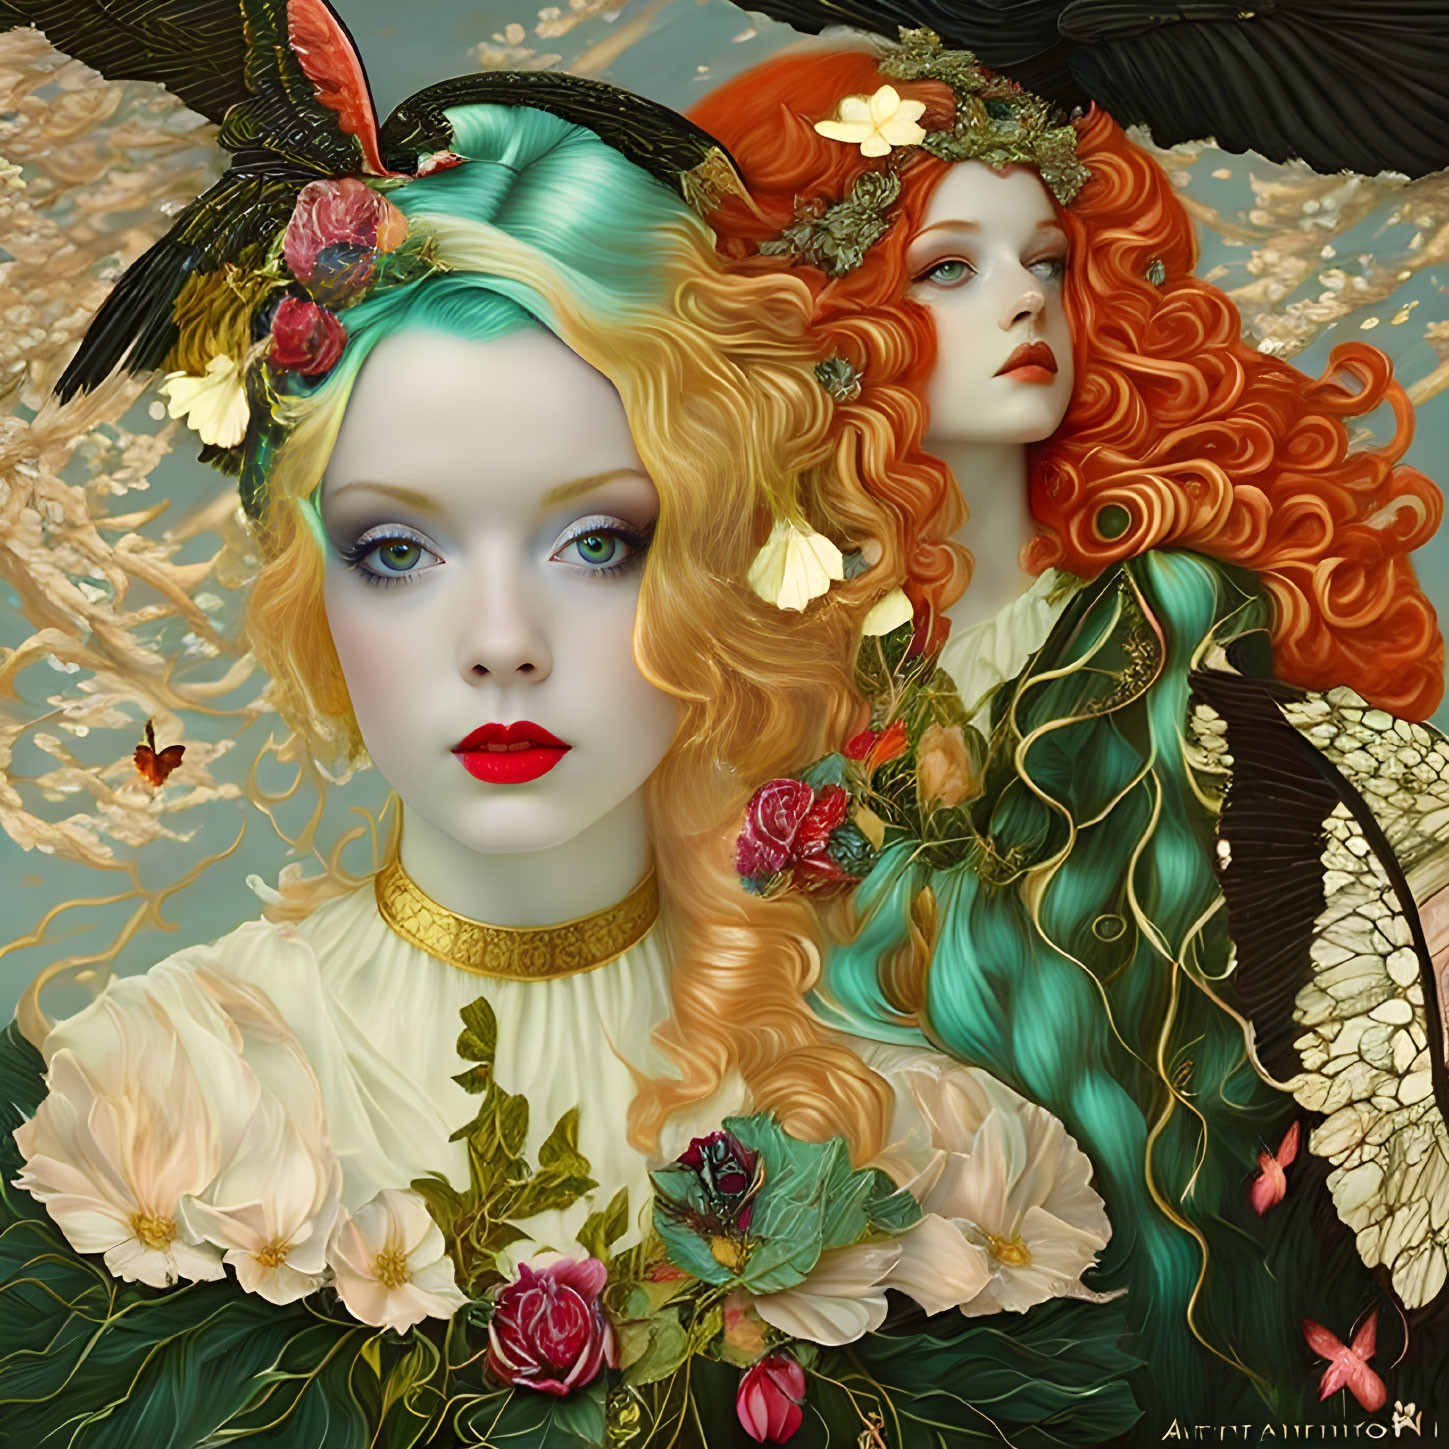 Surreal red-haired female figures in nature-inspired attire on golden backdrop